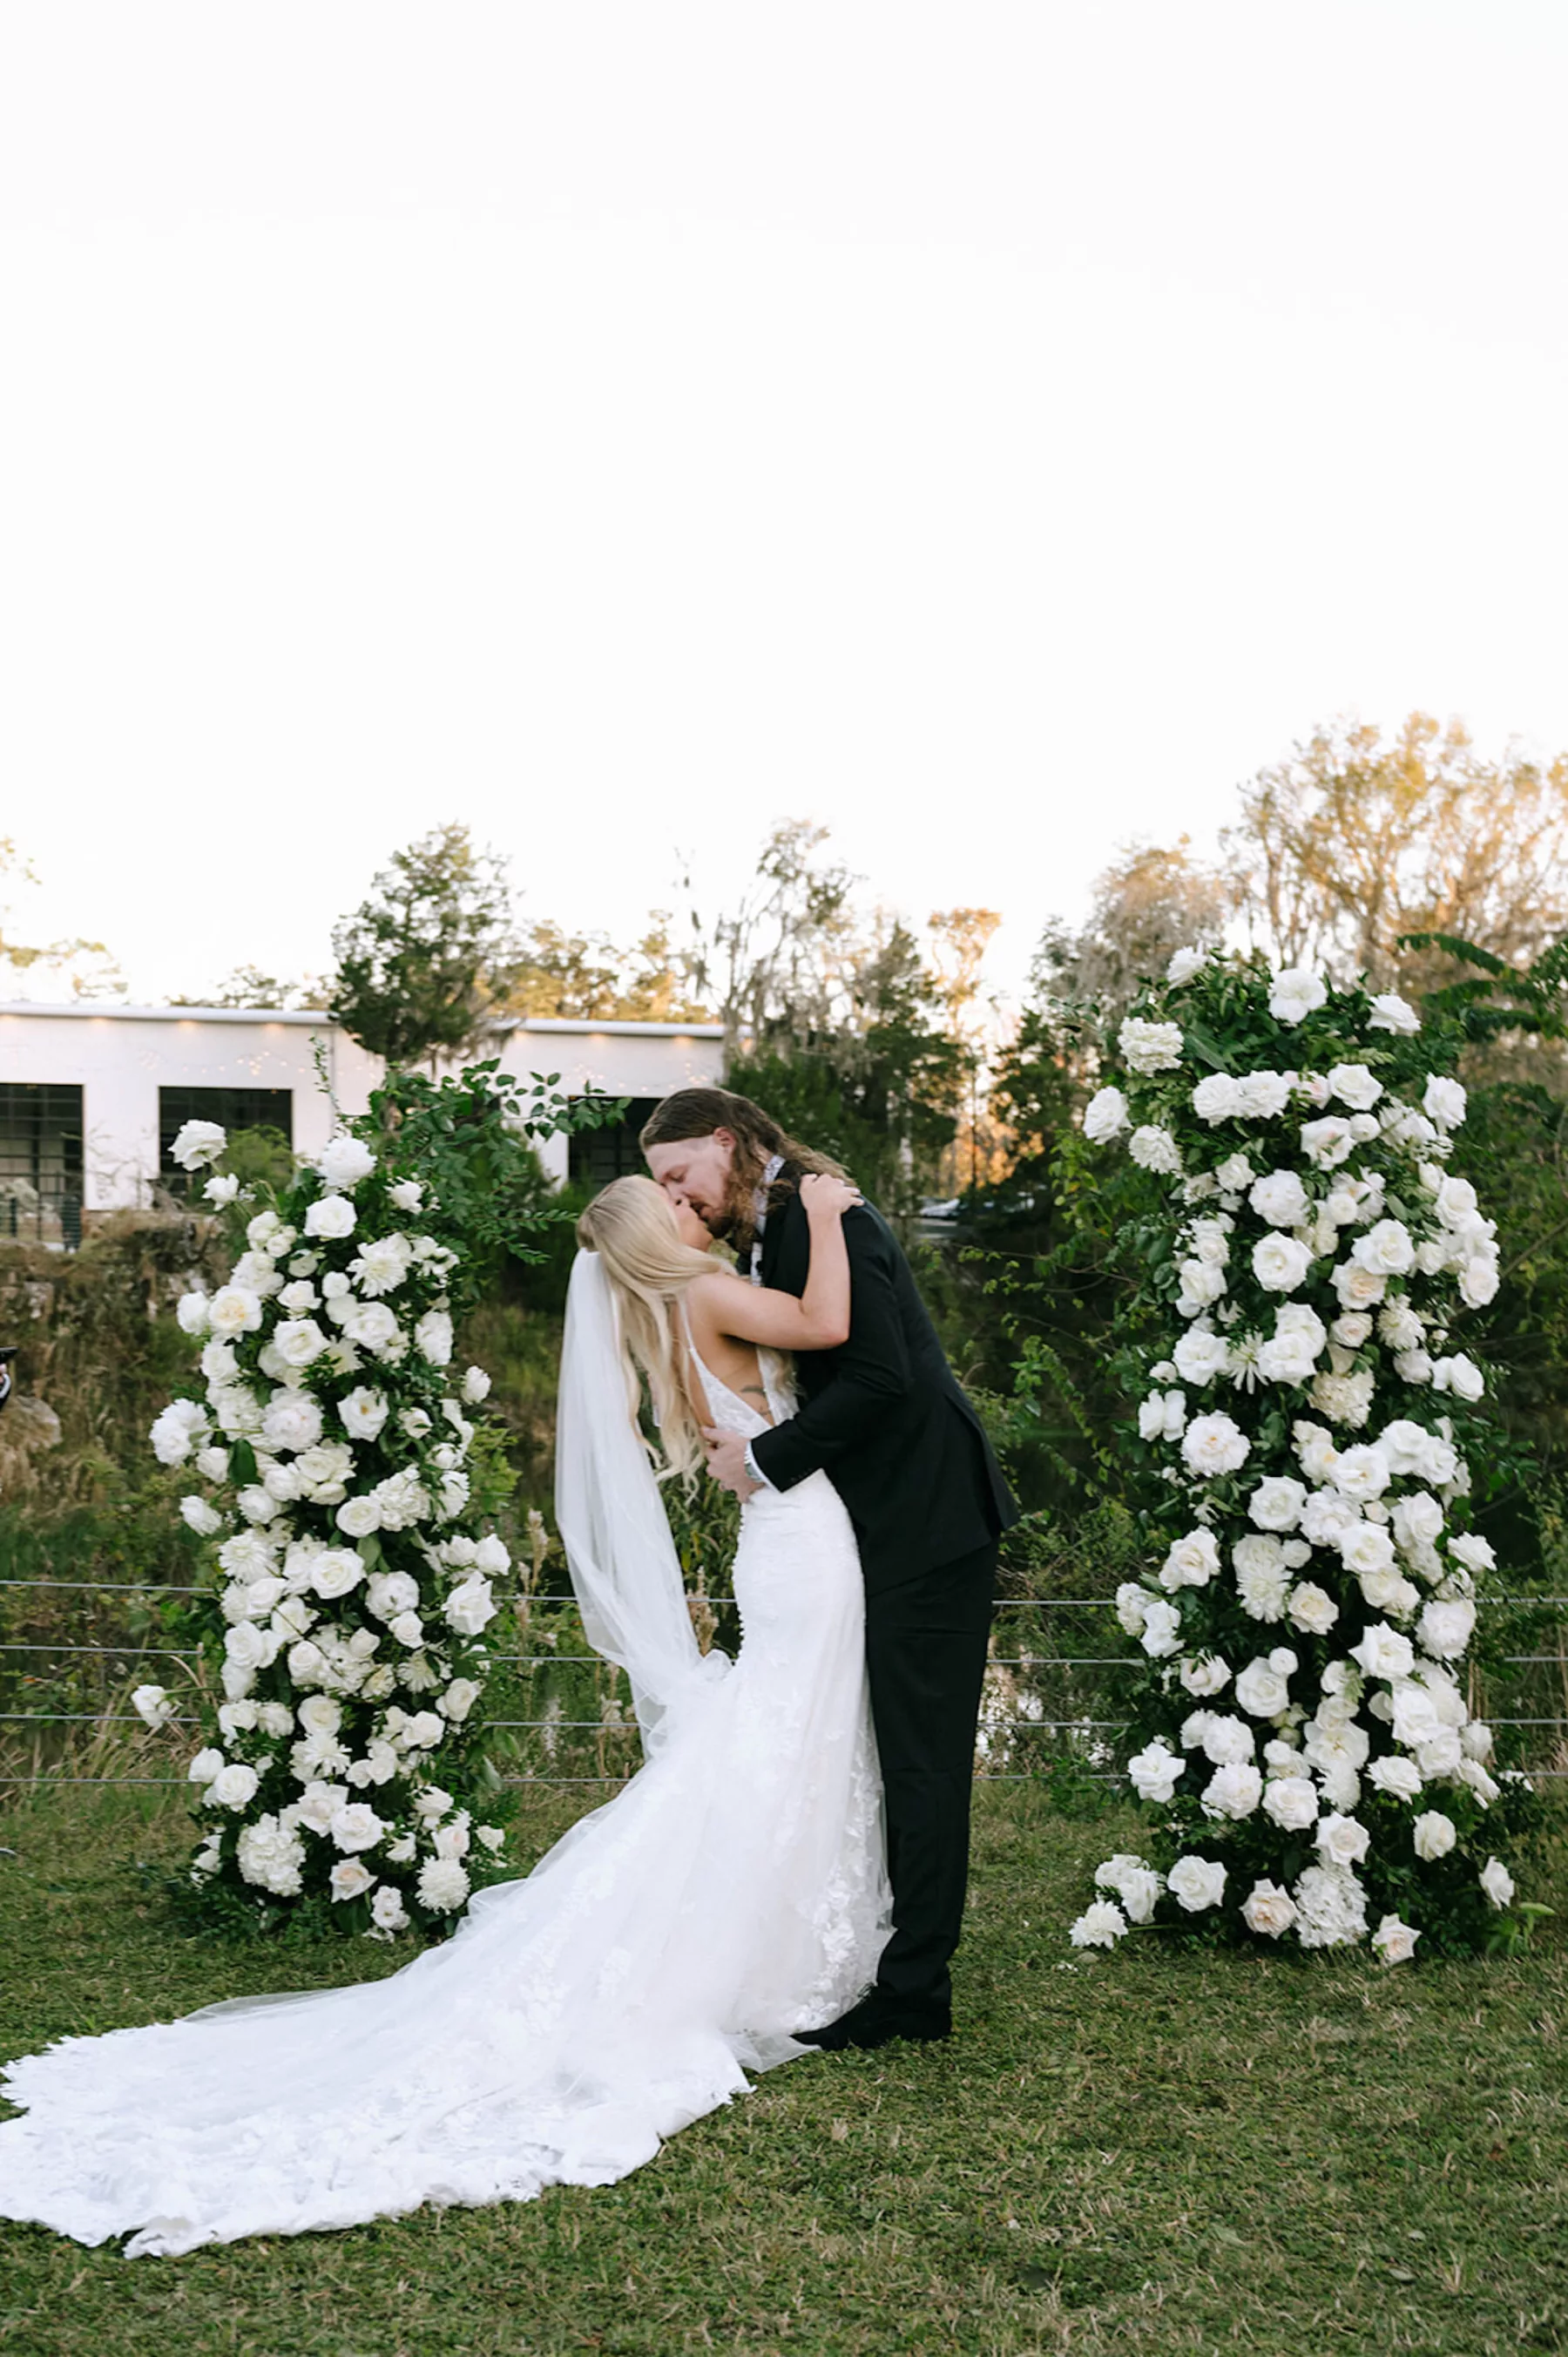 Bride and Groom First Kiss Wedding Portrait | Asymmetrical Floral Arbor with White Roses and Greenery Ideas | Tampa Bay Florist Bloom Shakalaka | Planner Kelci Leigh Events